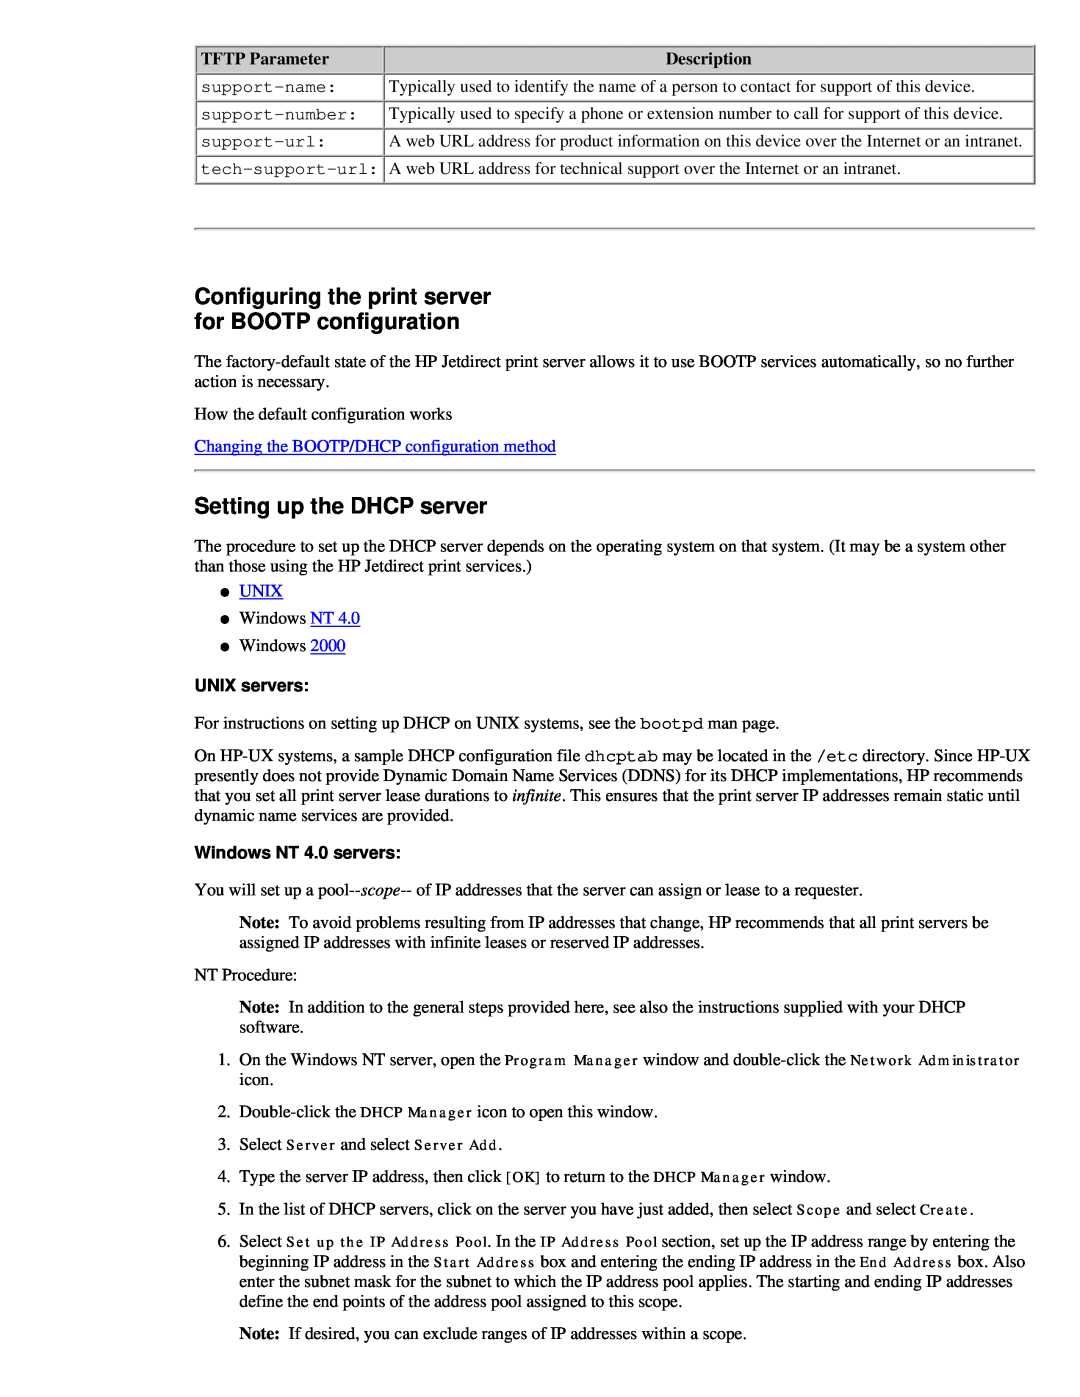 HP 310X Configuring the print server for BOOTP configuration, Setting up the DHCP server, TFTP Parameter, Description 